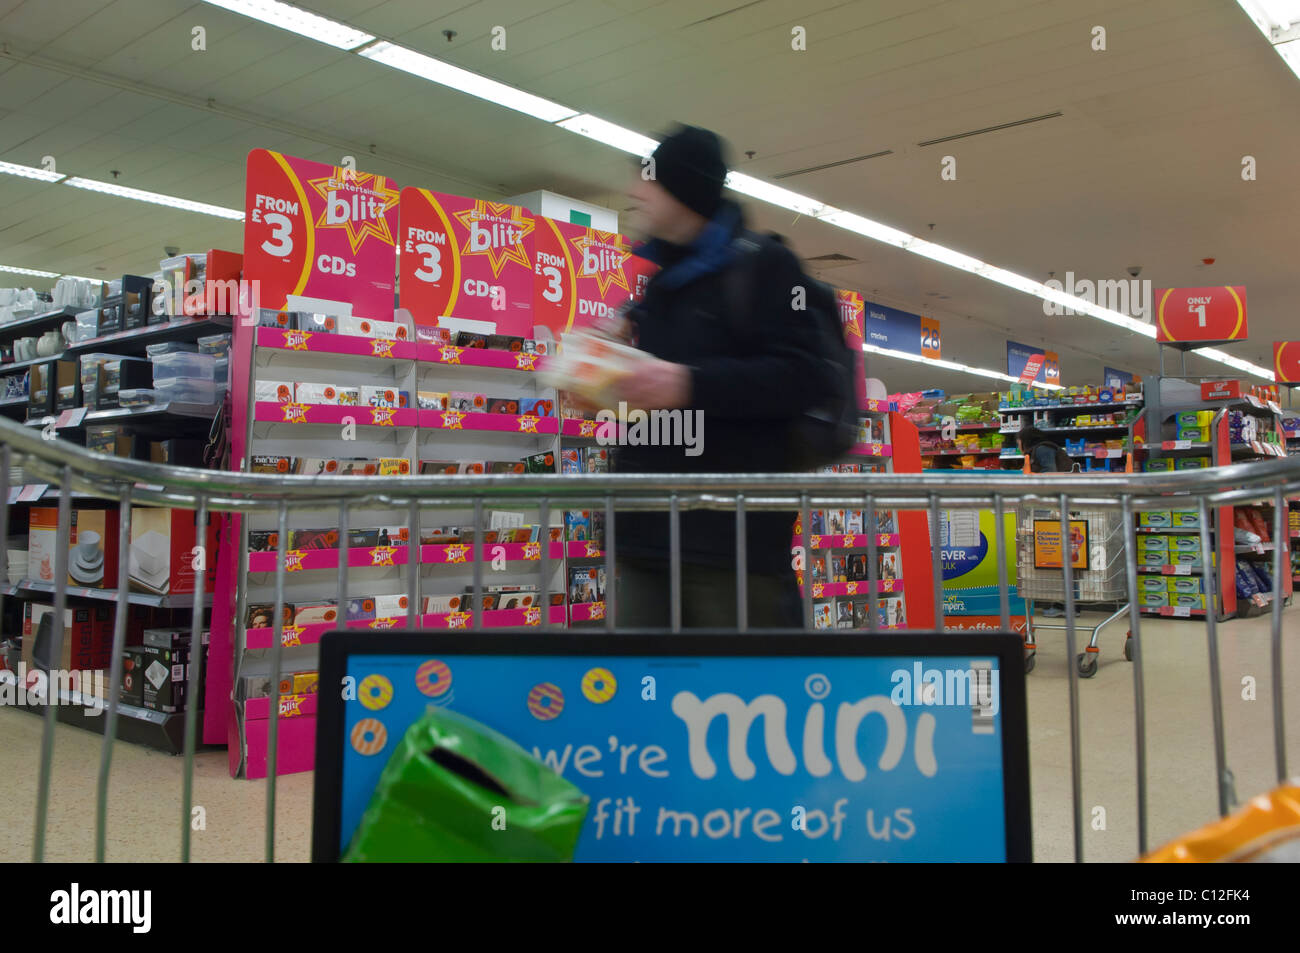 Shopping in Sainsbury's supermarket with camera in the trolley showing deliberate movement in the Uk Stock Photo